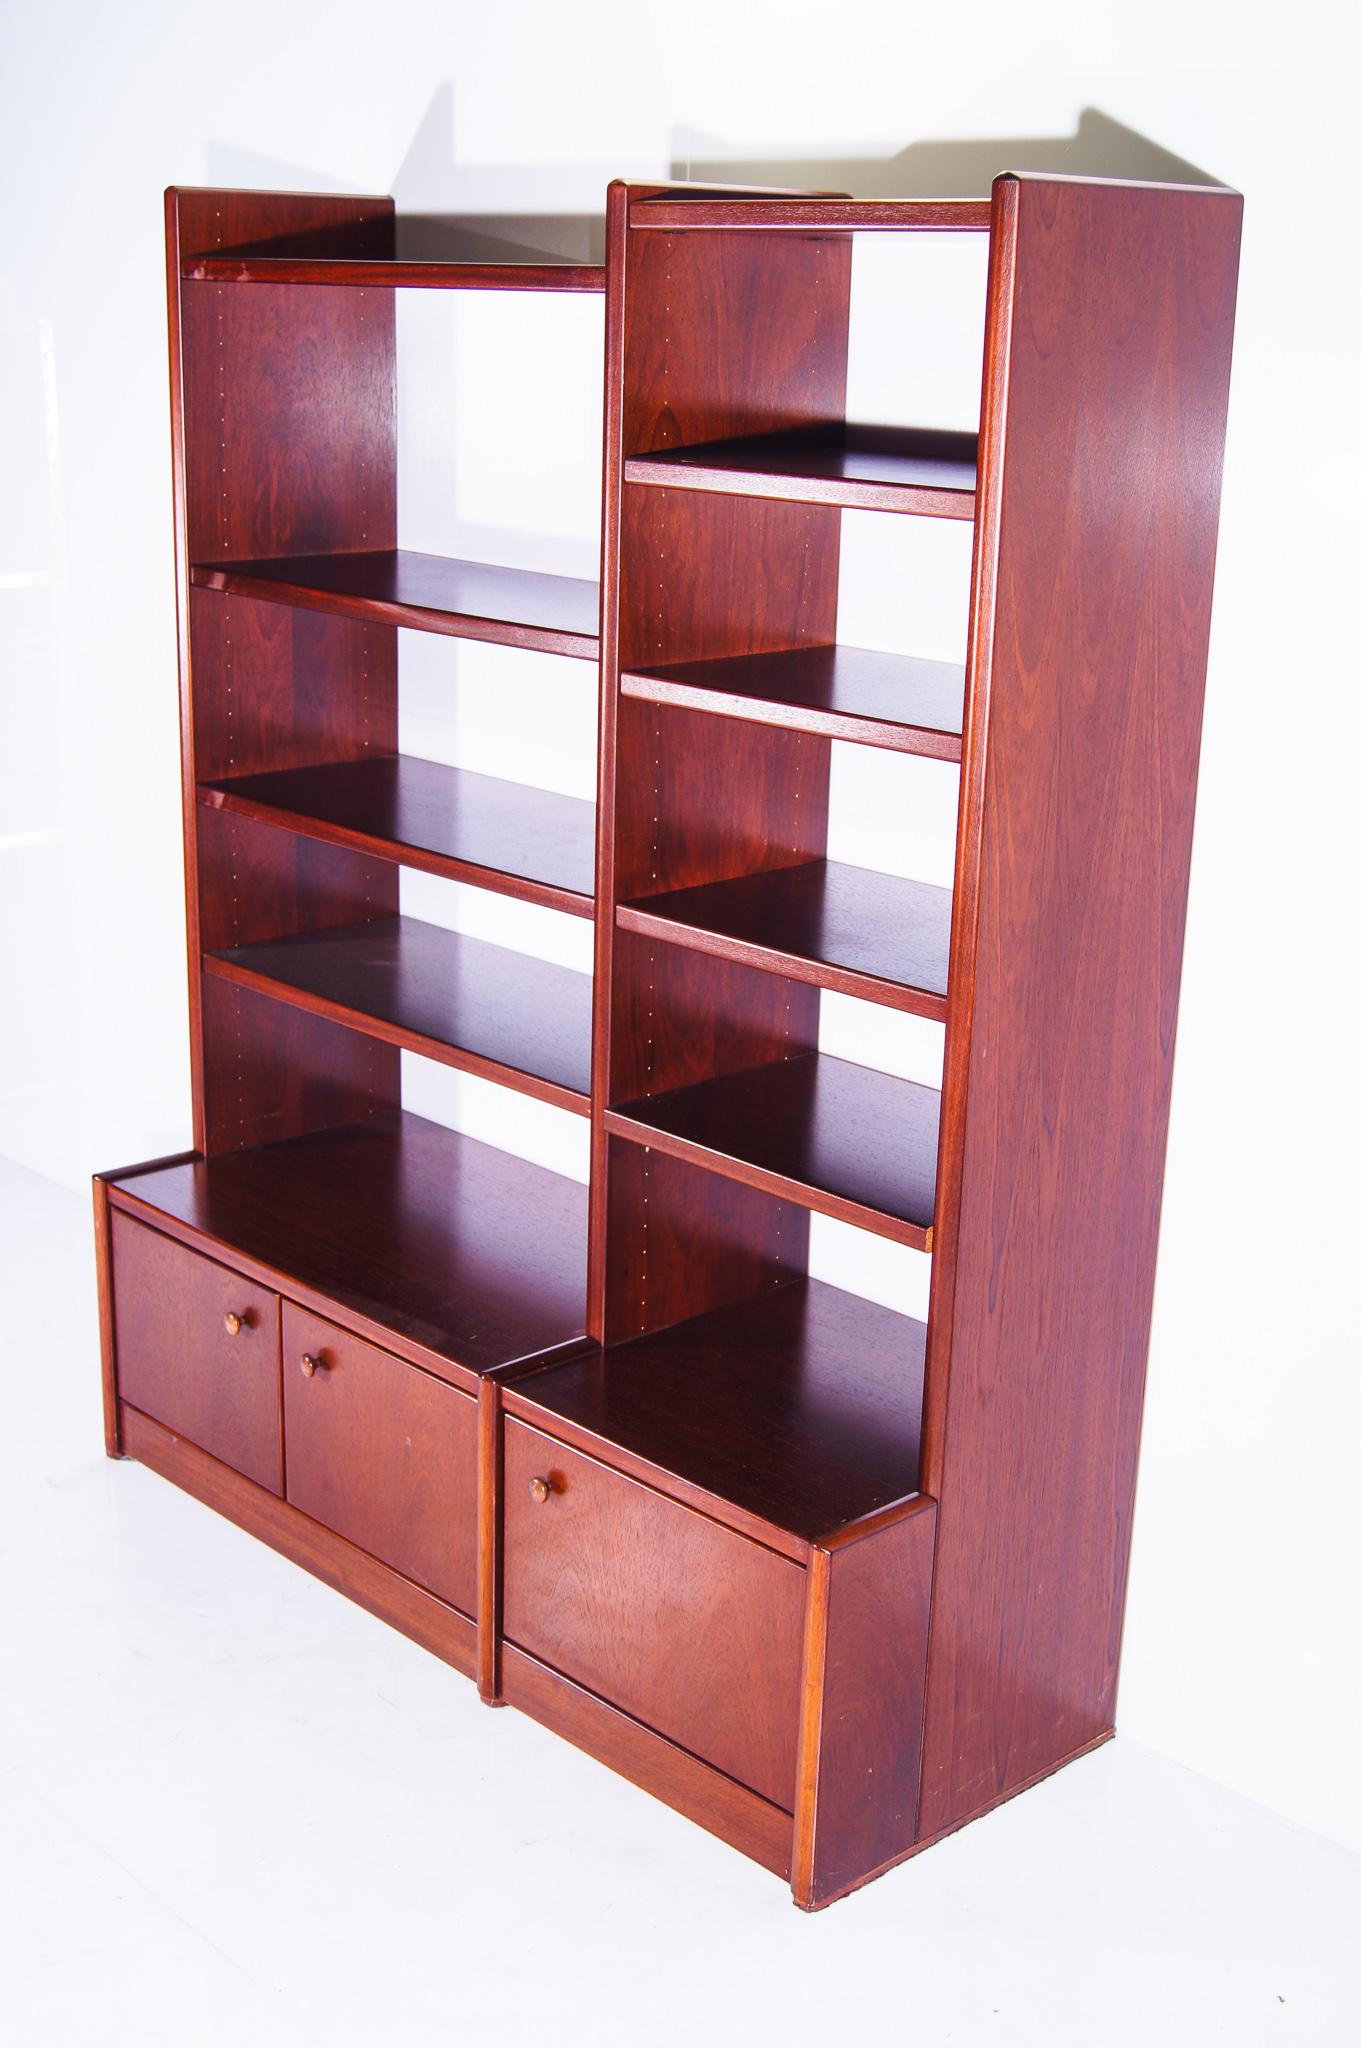 Hulsta - Mahogany heavy wallcabinet with shelves
 

Germany, aprox 1990.

 

Beautifull mahogany wall cabinet. Adjustable shelves to preferred heights. In good condition with little signs of use similar to its age. The pictures are an